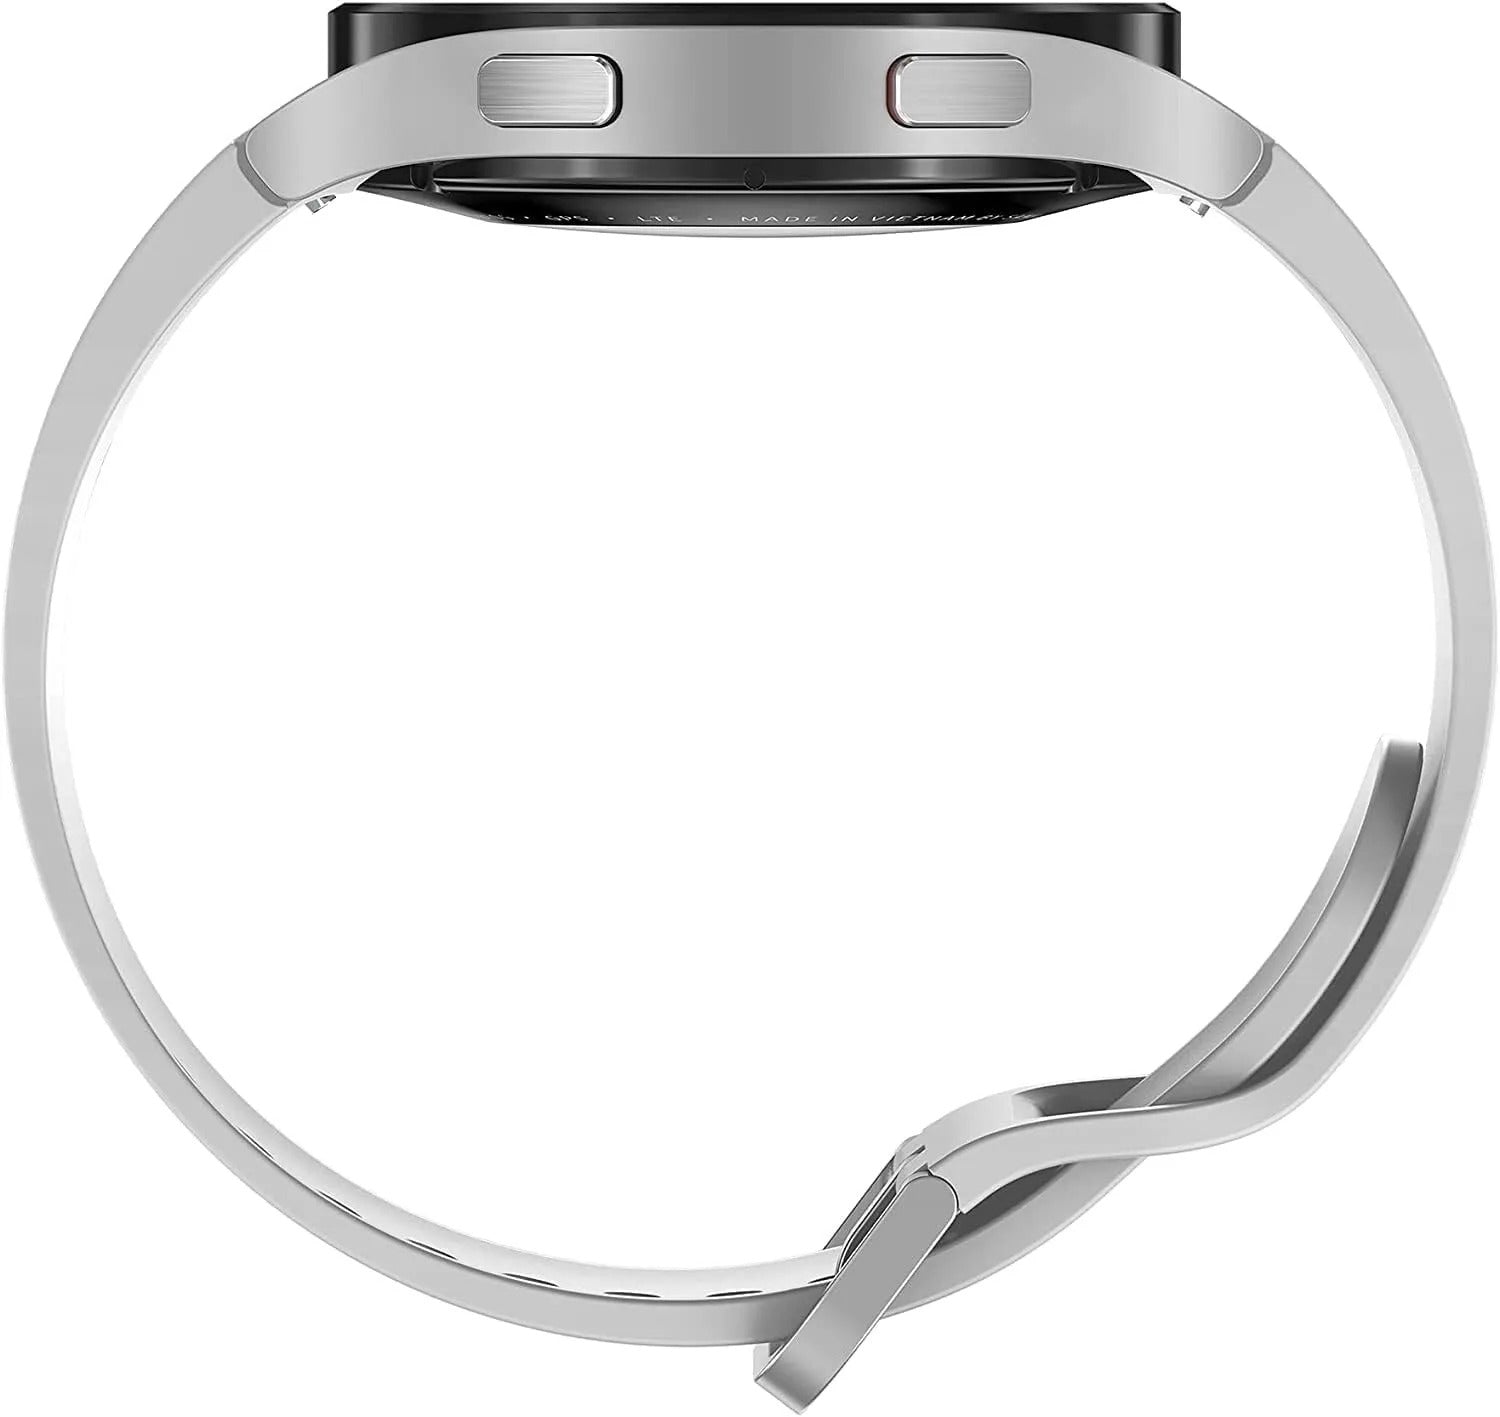 Samsung Galaxy Watch4 (WIFI, LTE, 44mm) Silver Case &amp; White Rubber Band (Refurbished)